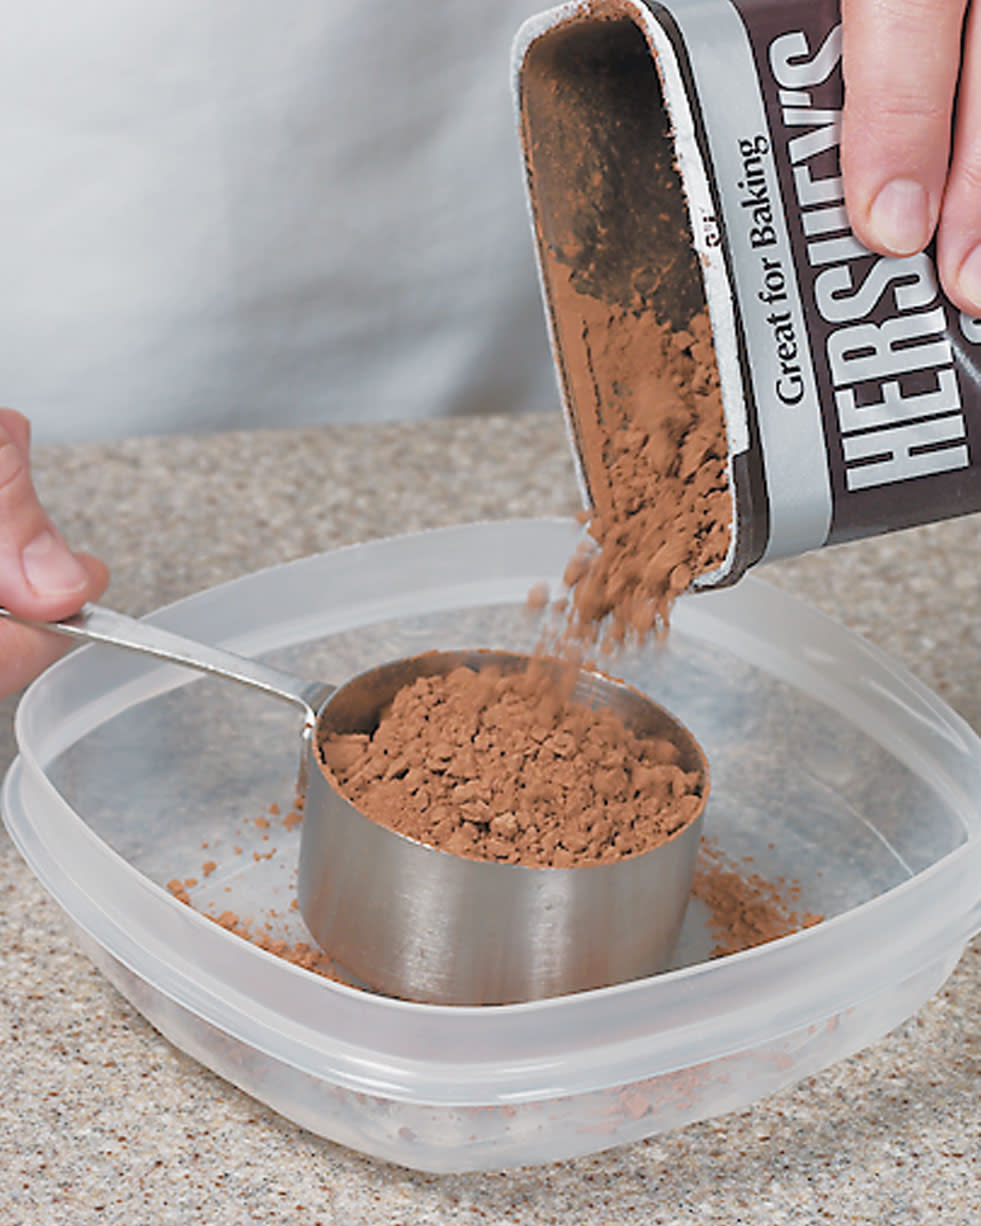 How to Measure Dry Ingredients Video and Steps